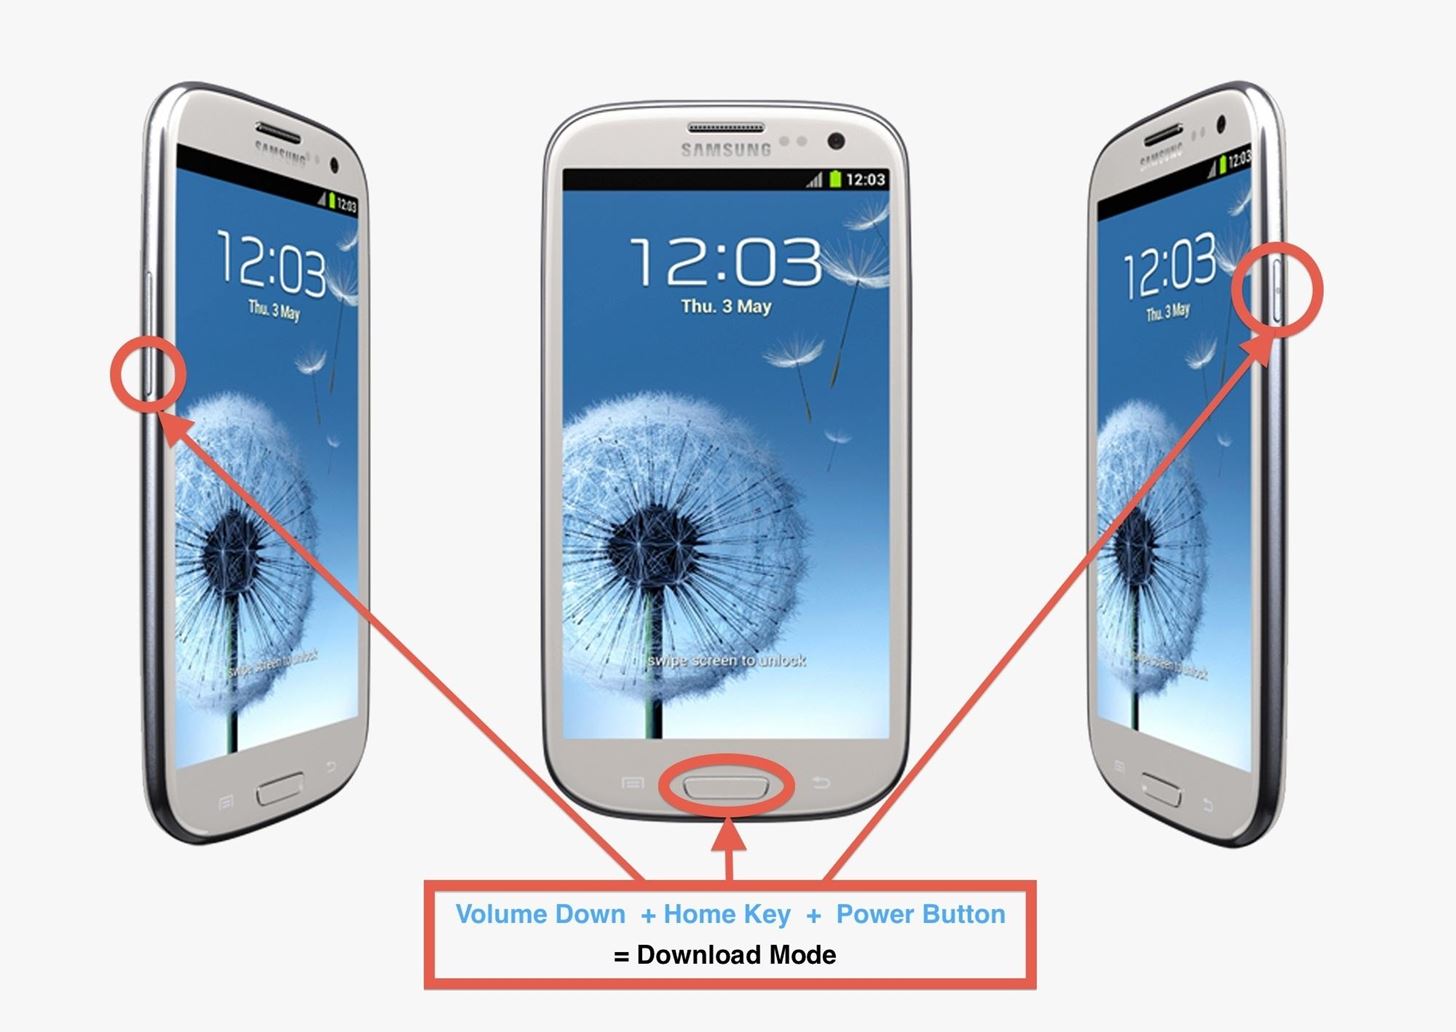 How to Root Your Samsung Galaxy S3 (And Flash Stock ROMs) Using Odin for Windows